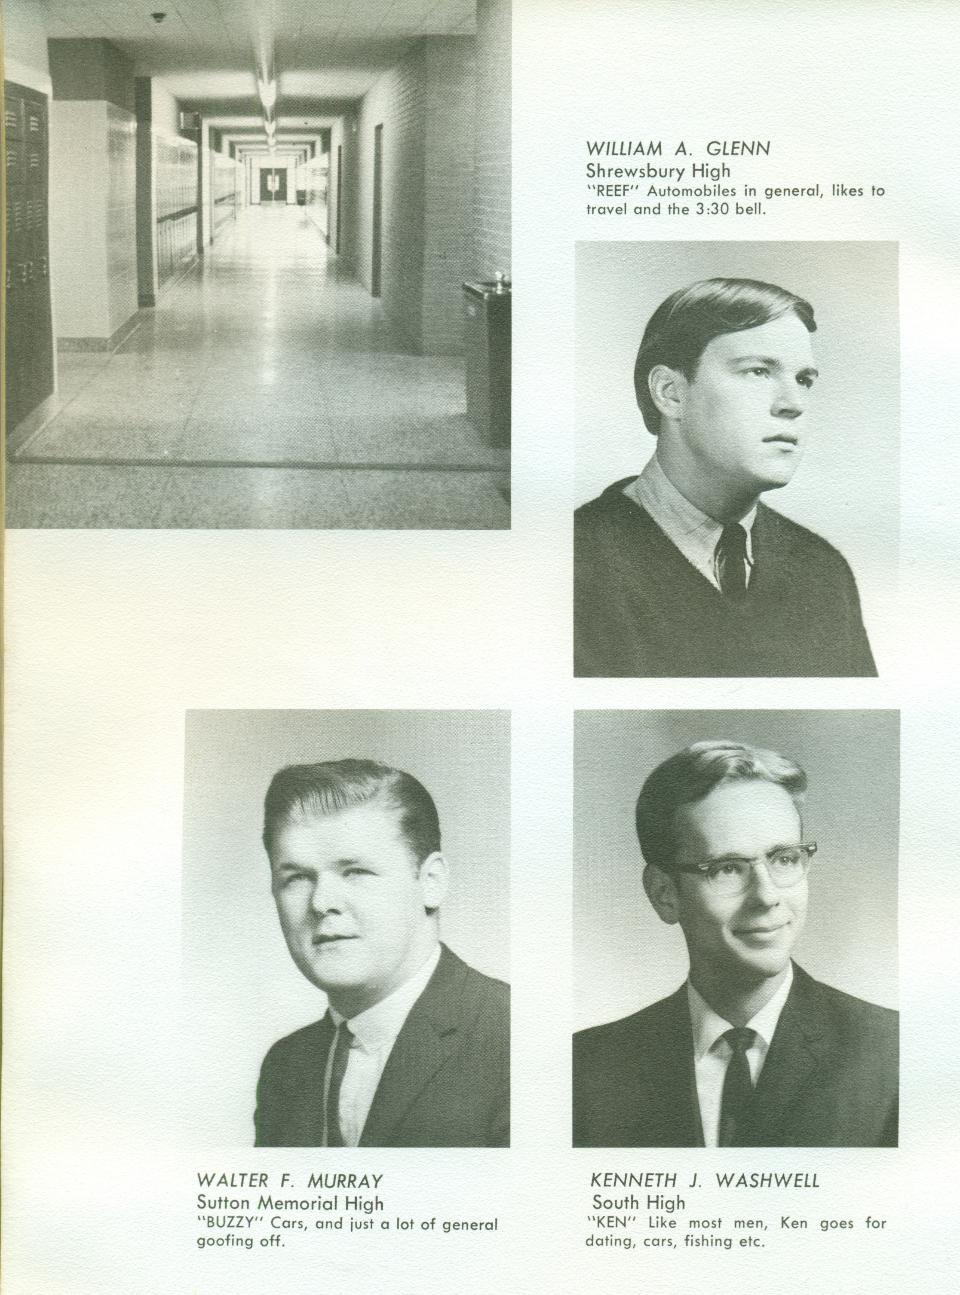 Worcester Industrial Technical Institute Class of 1967 Yearbook Metals Technology